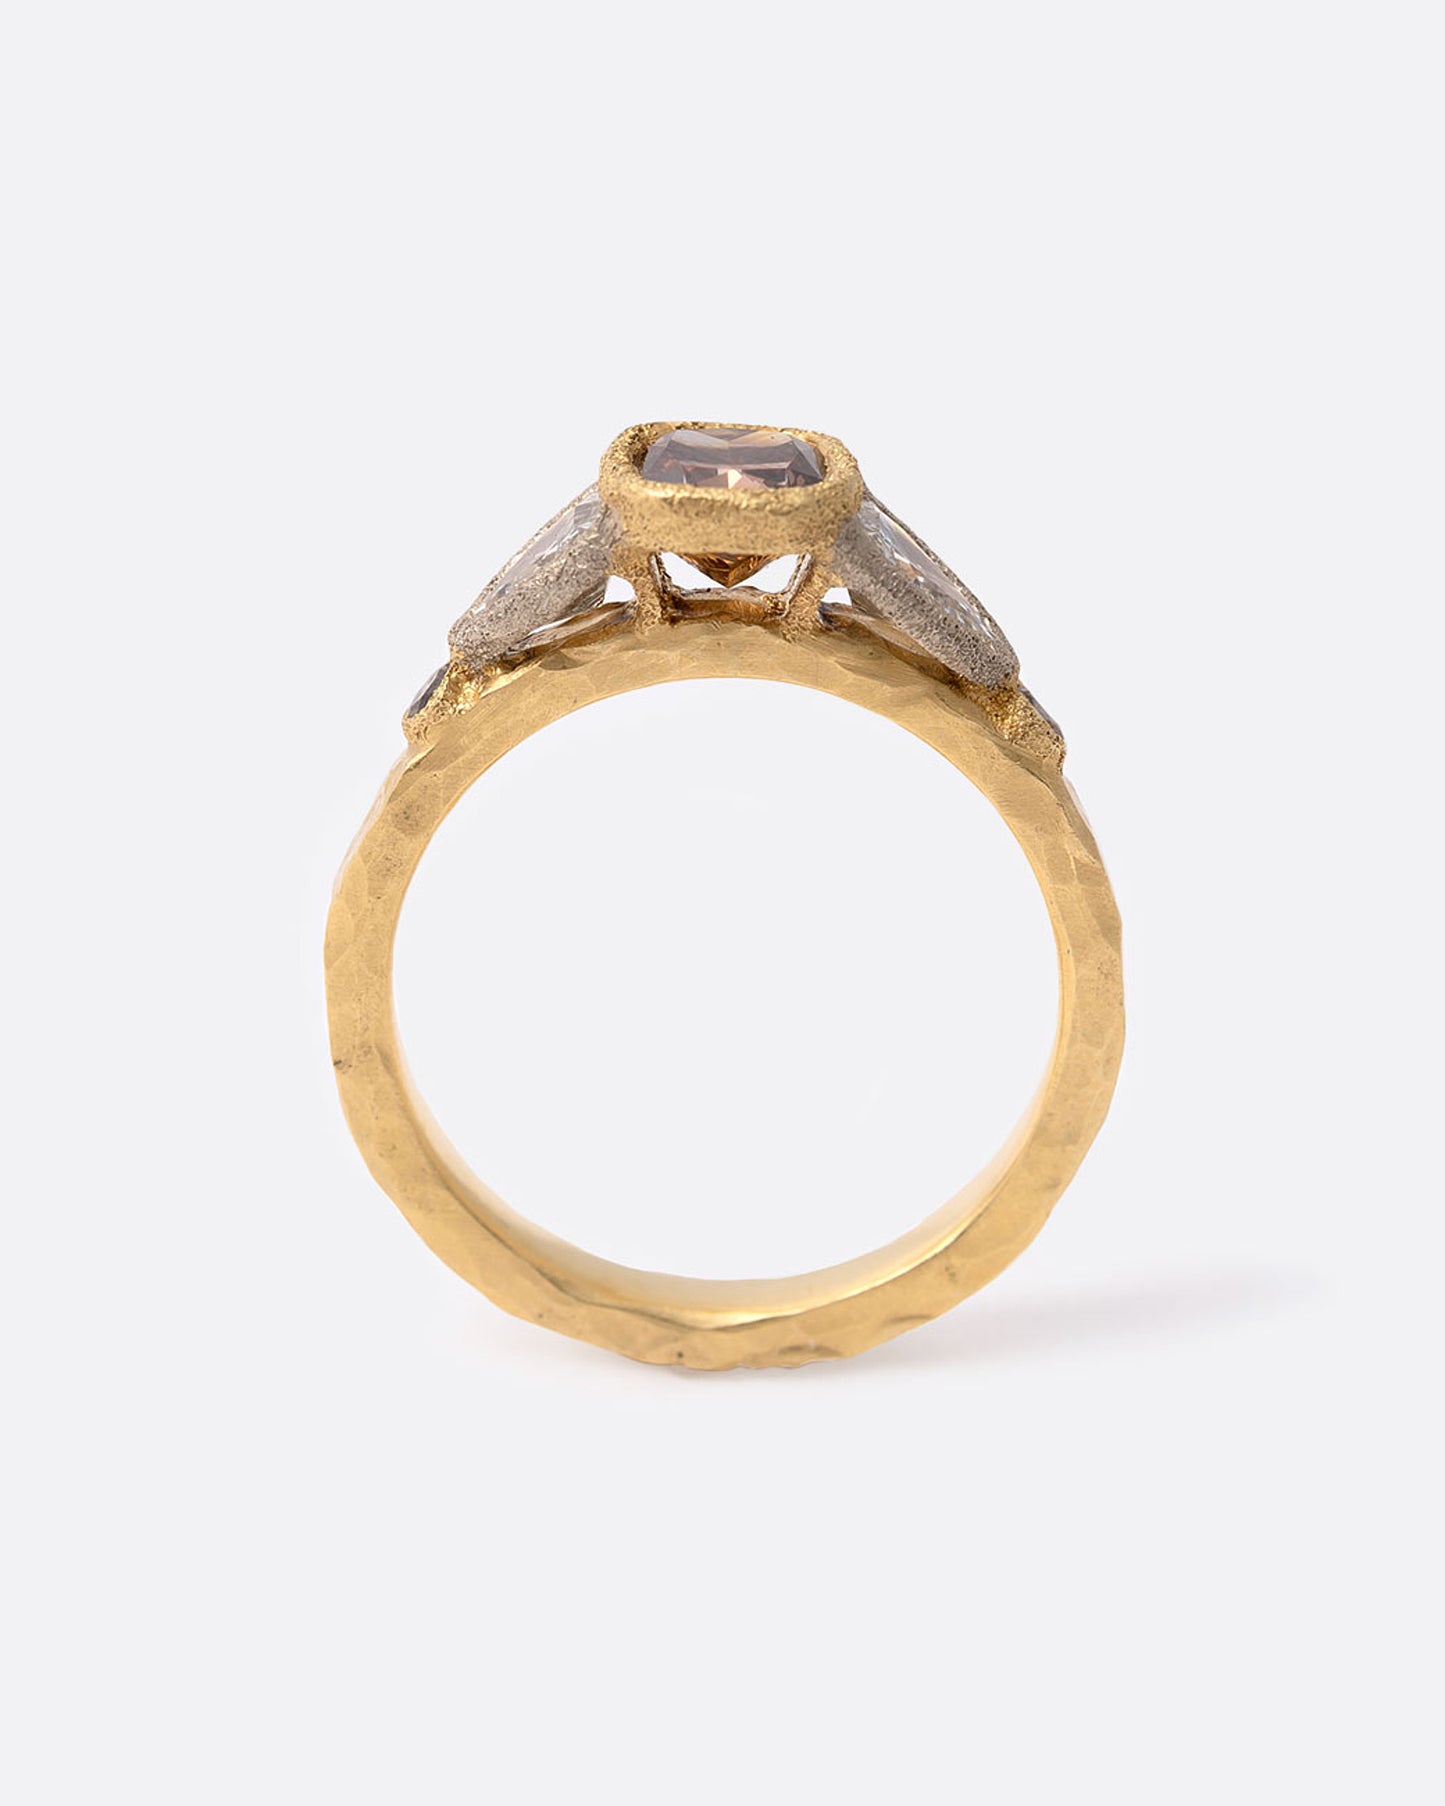 18k yellow gold ring with cushion cut brown diamond, two shield shaped white diamonds, and two round brown diamonds by Todd Pownell, shown from the side.